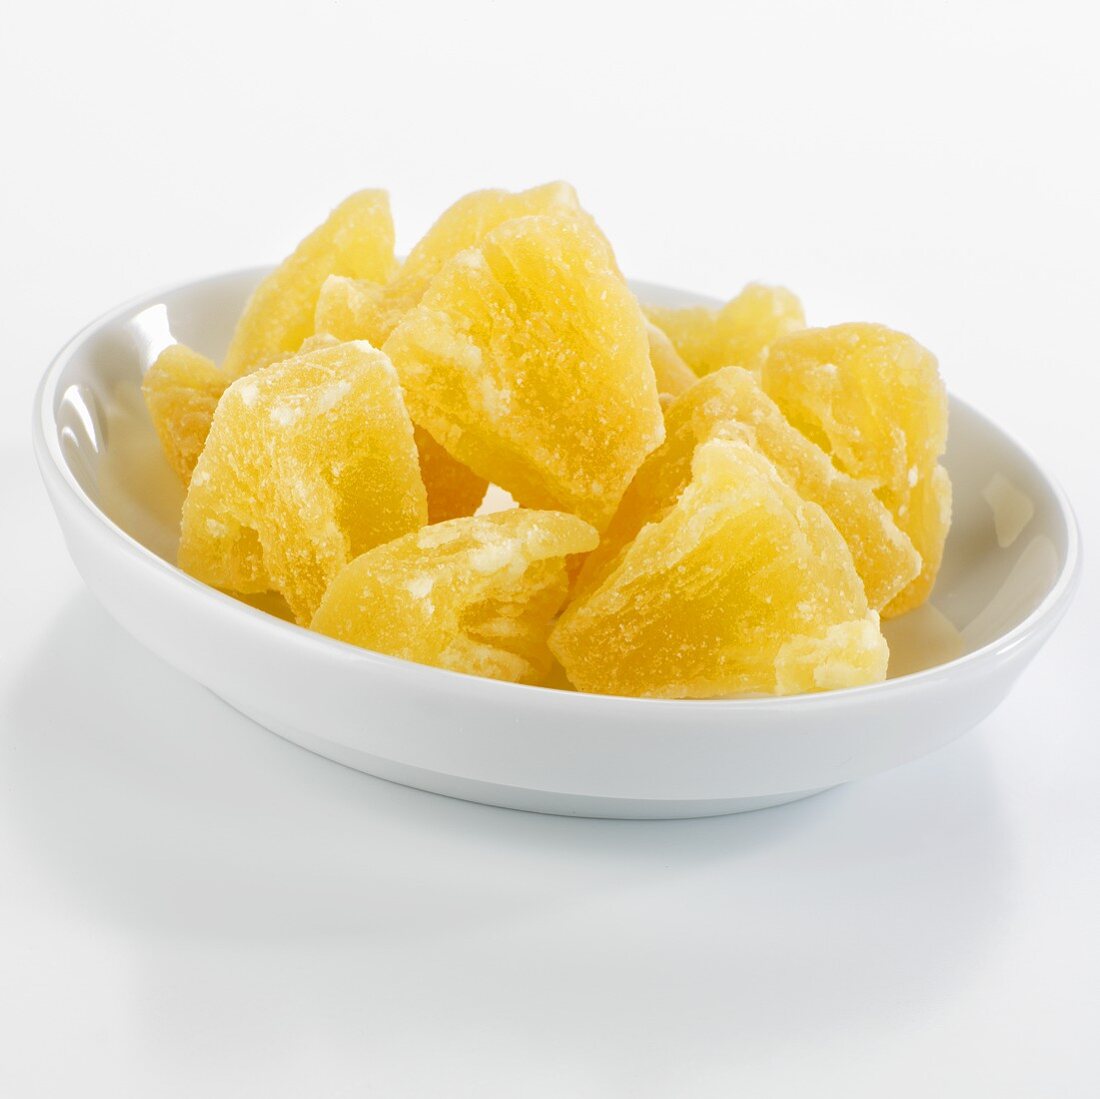 Candied pineapple chunks in a dish